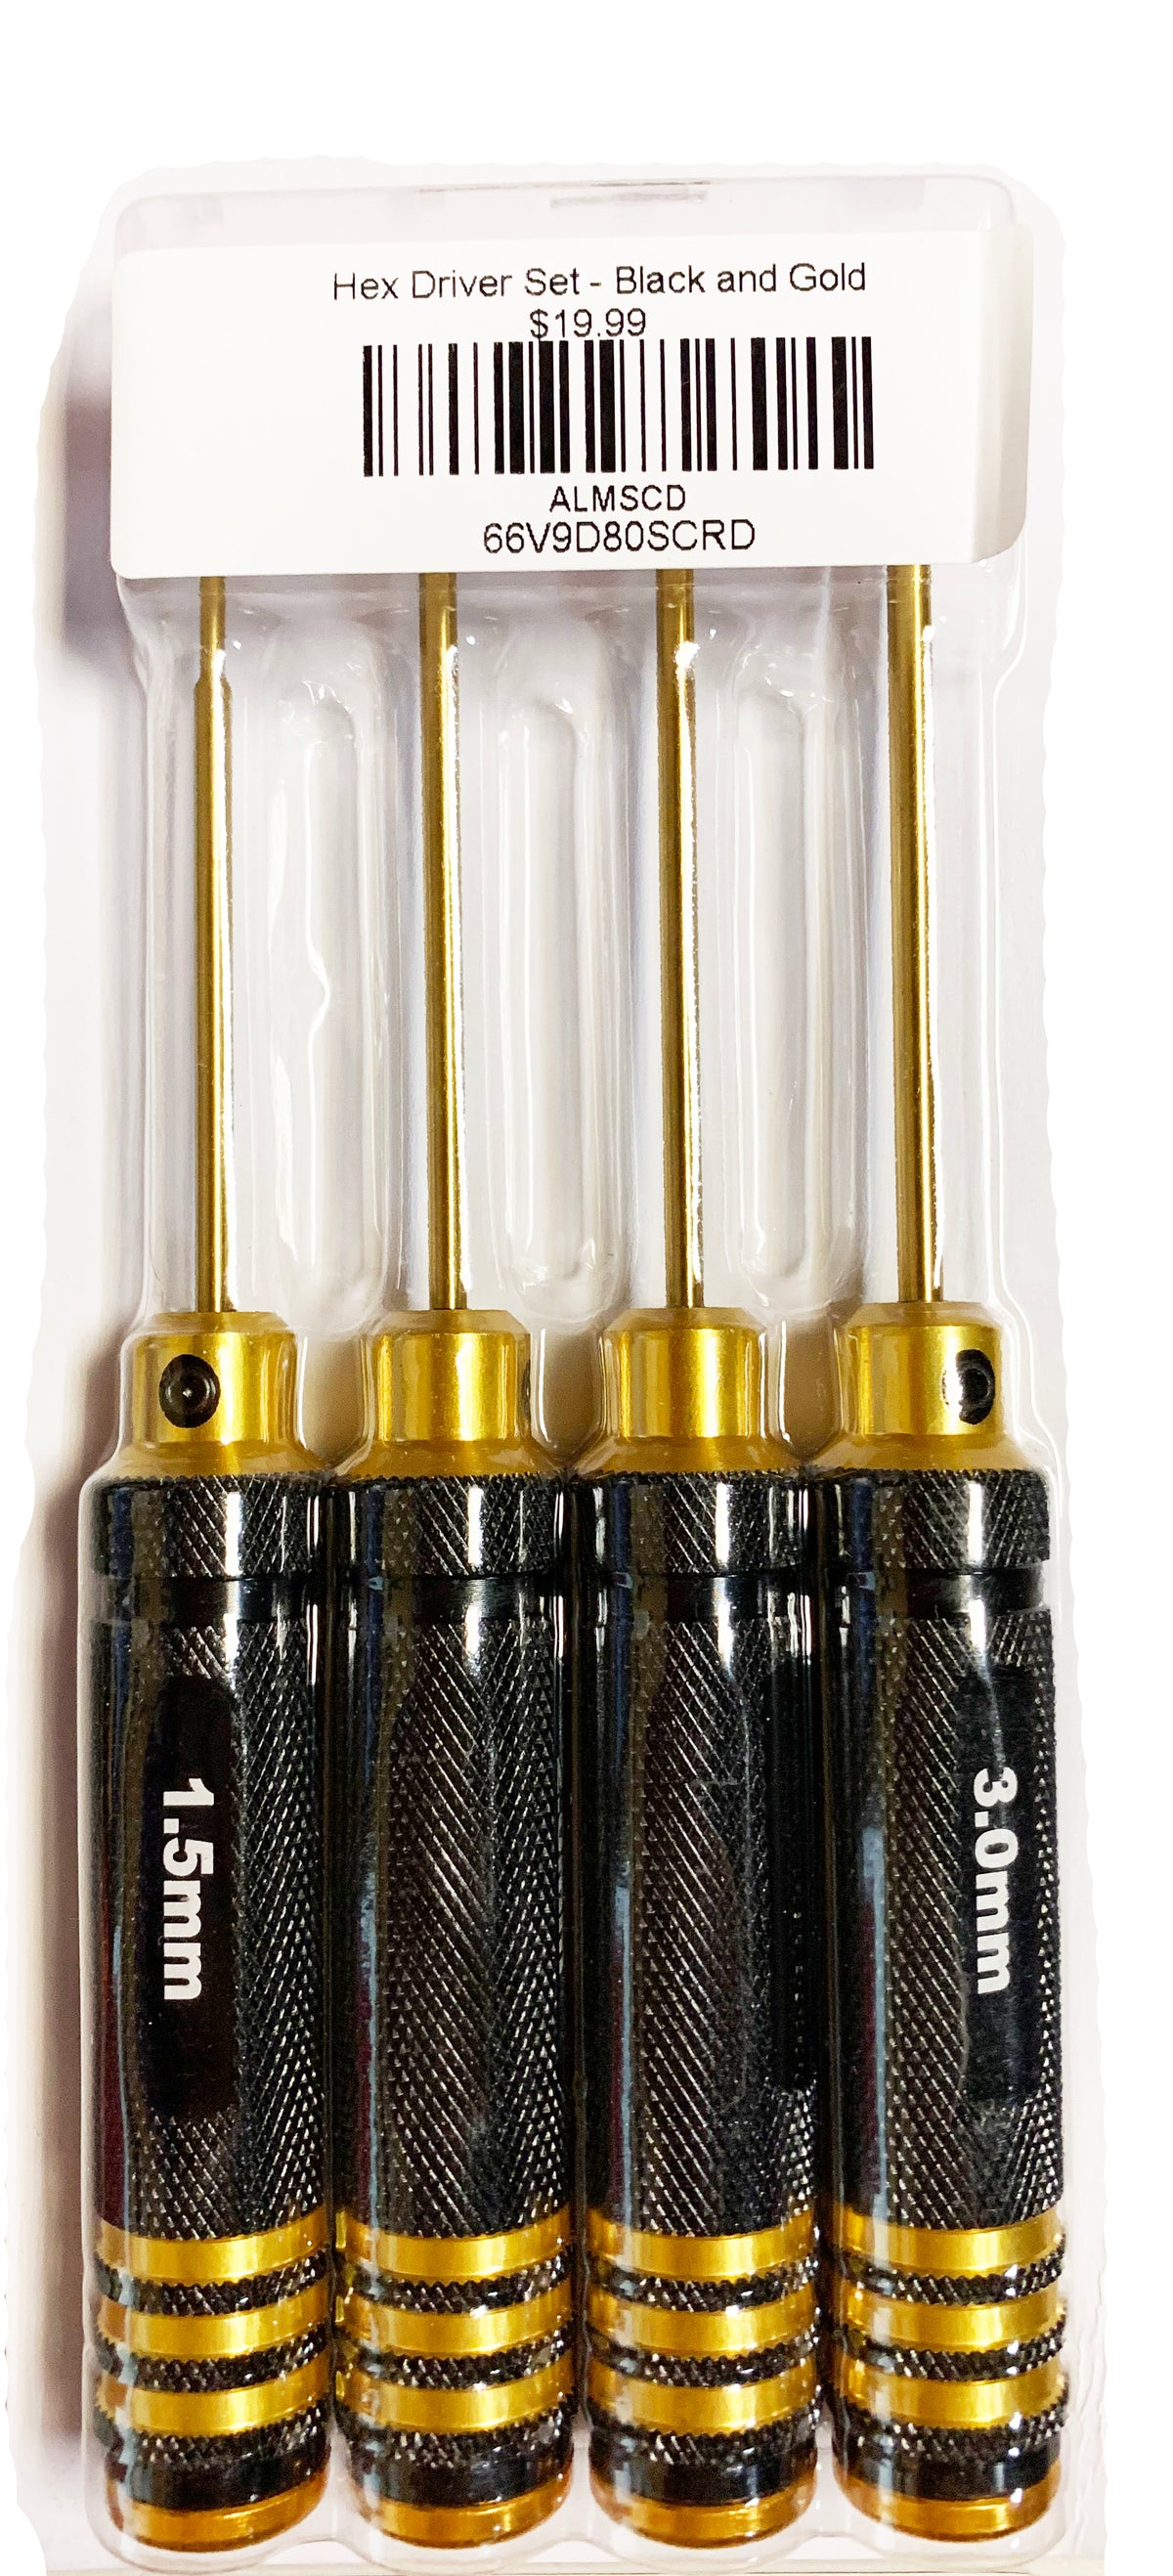 Hex Driver Set - Black and Gold